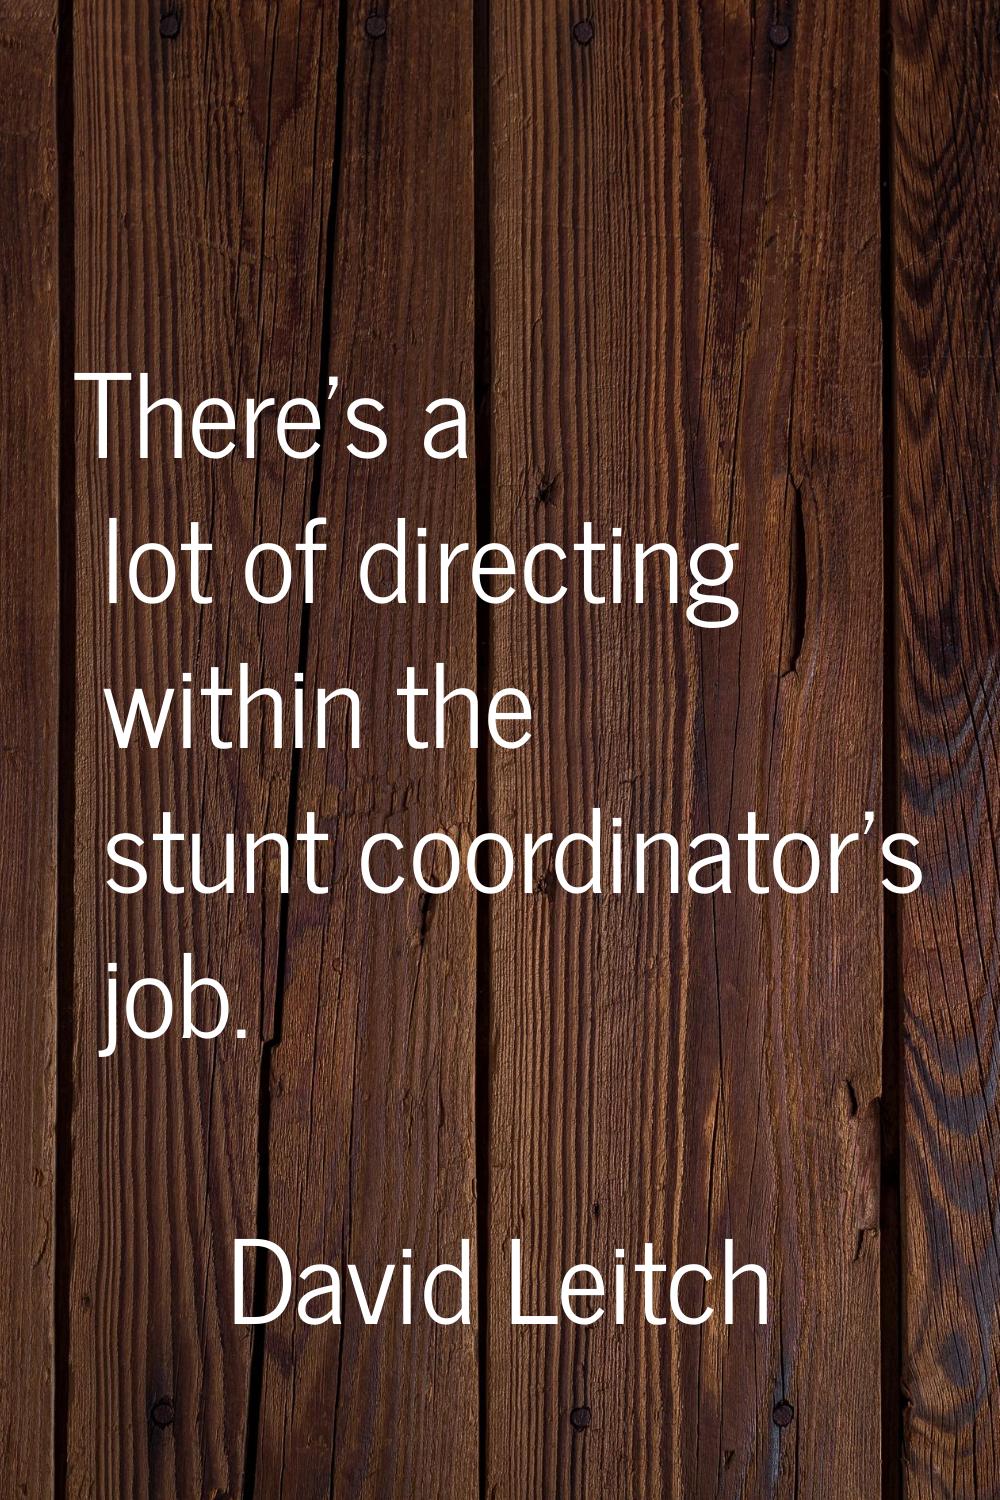 There's a lot of directing within the stunt coordinator's job.